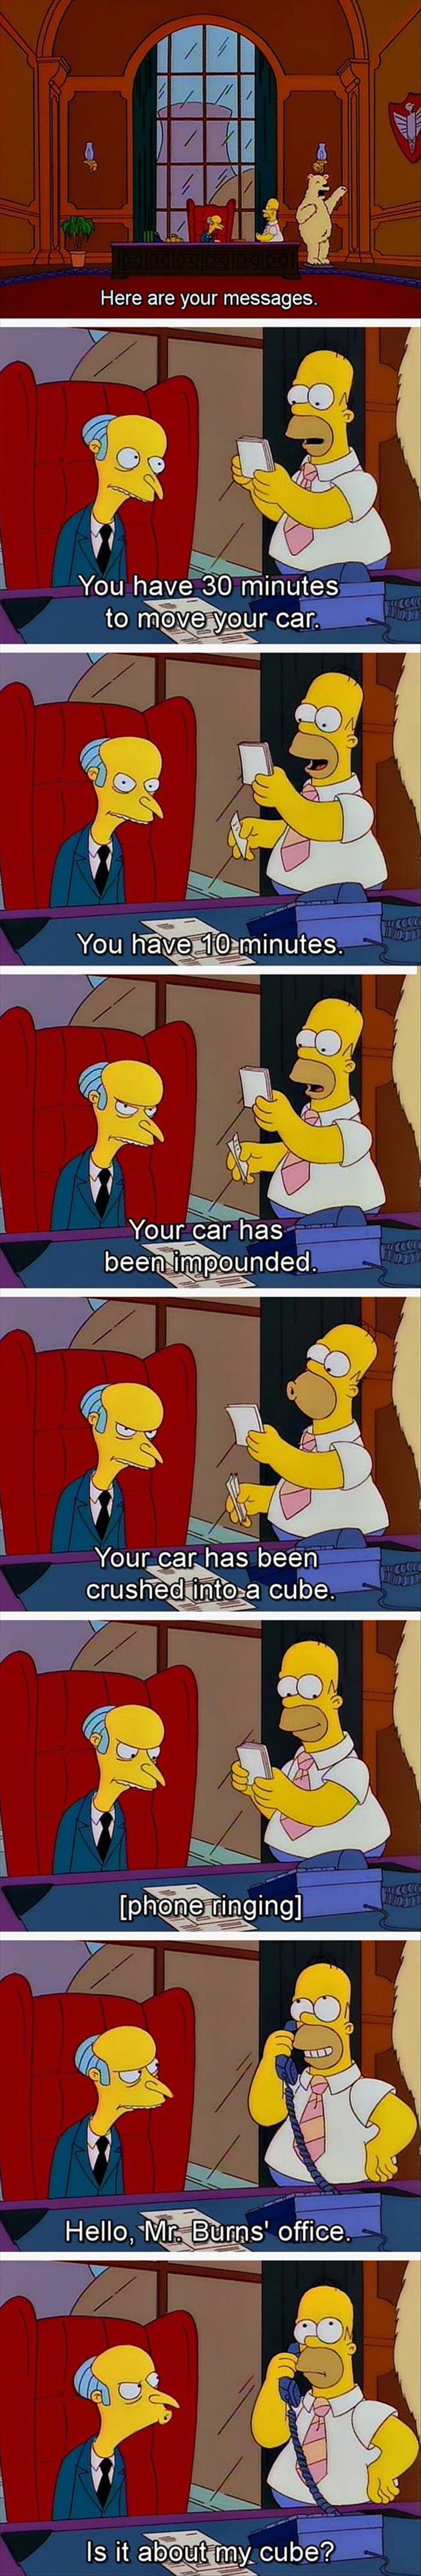 Message. Last Burns/Smithers Post.. they should make an episode where Mr. Burns runs for president